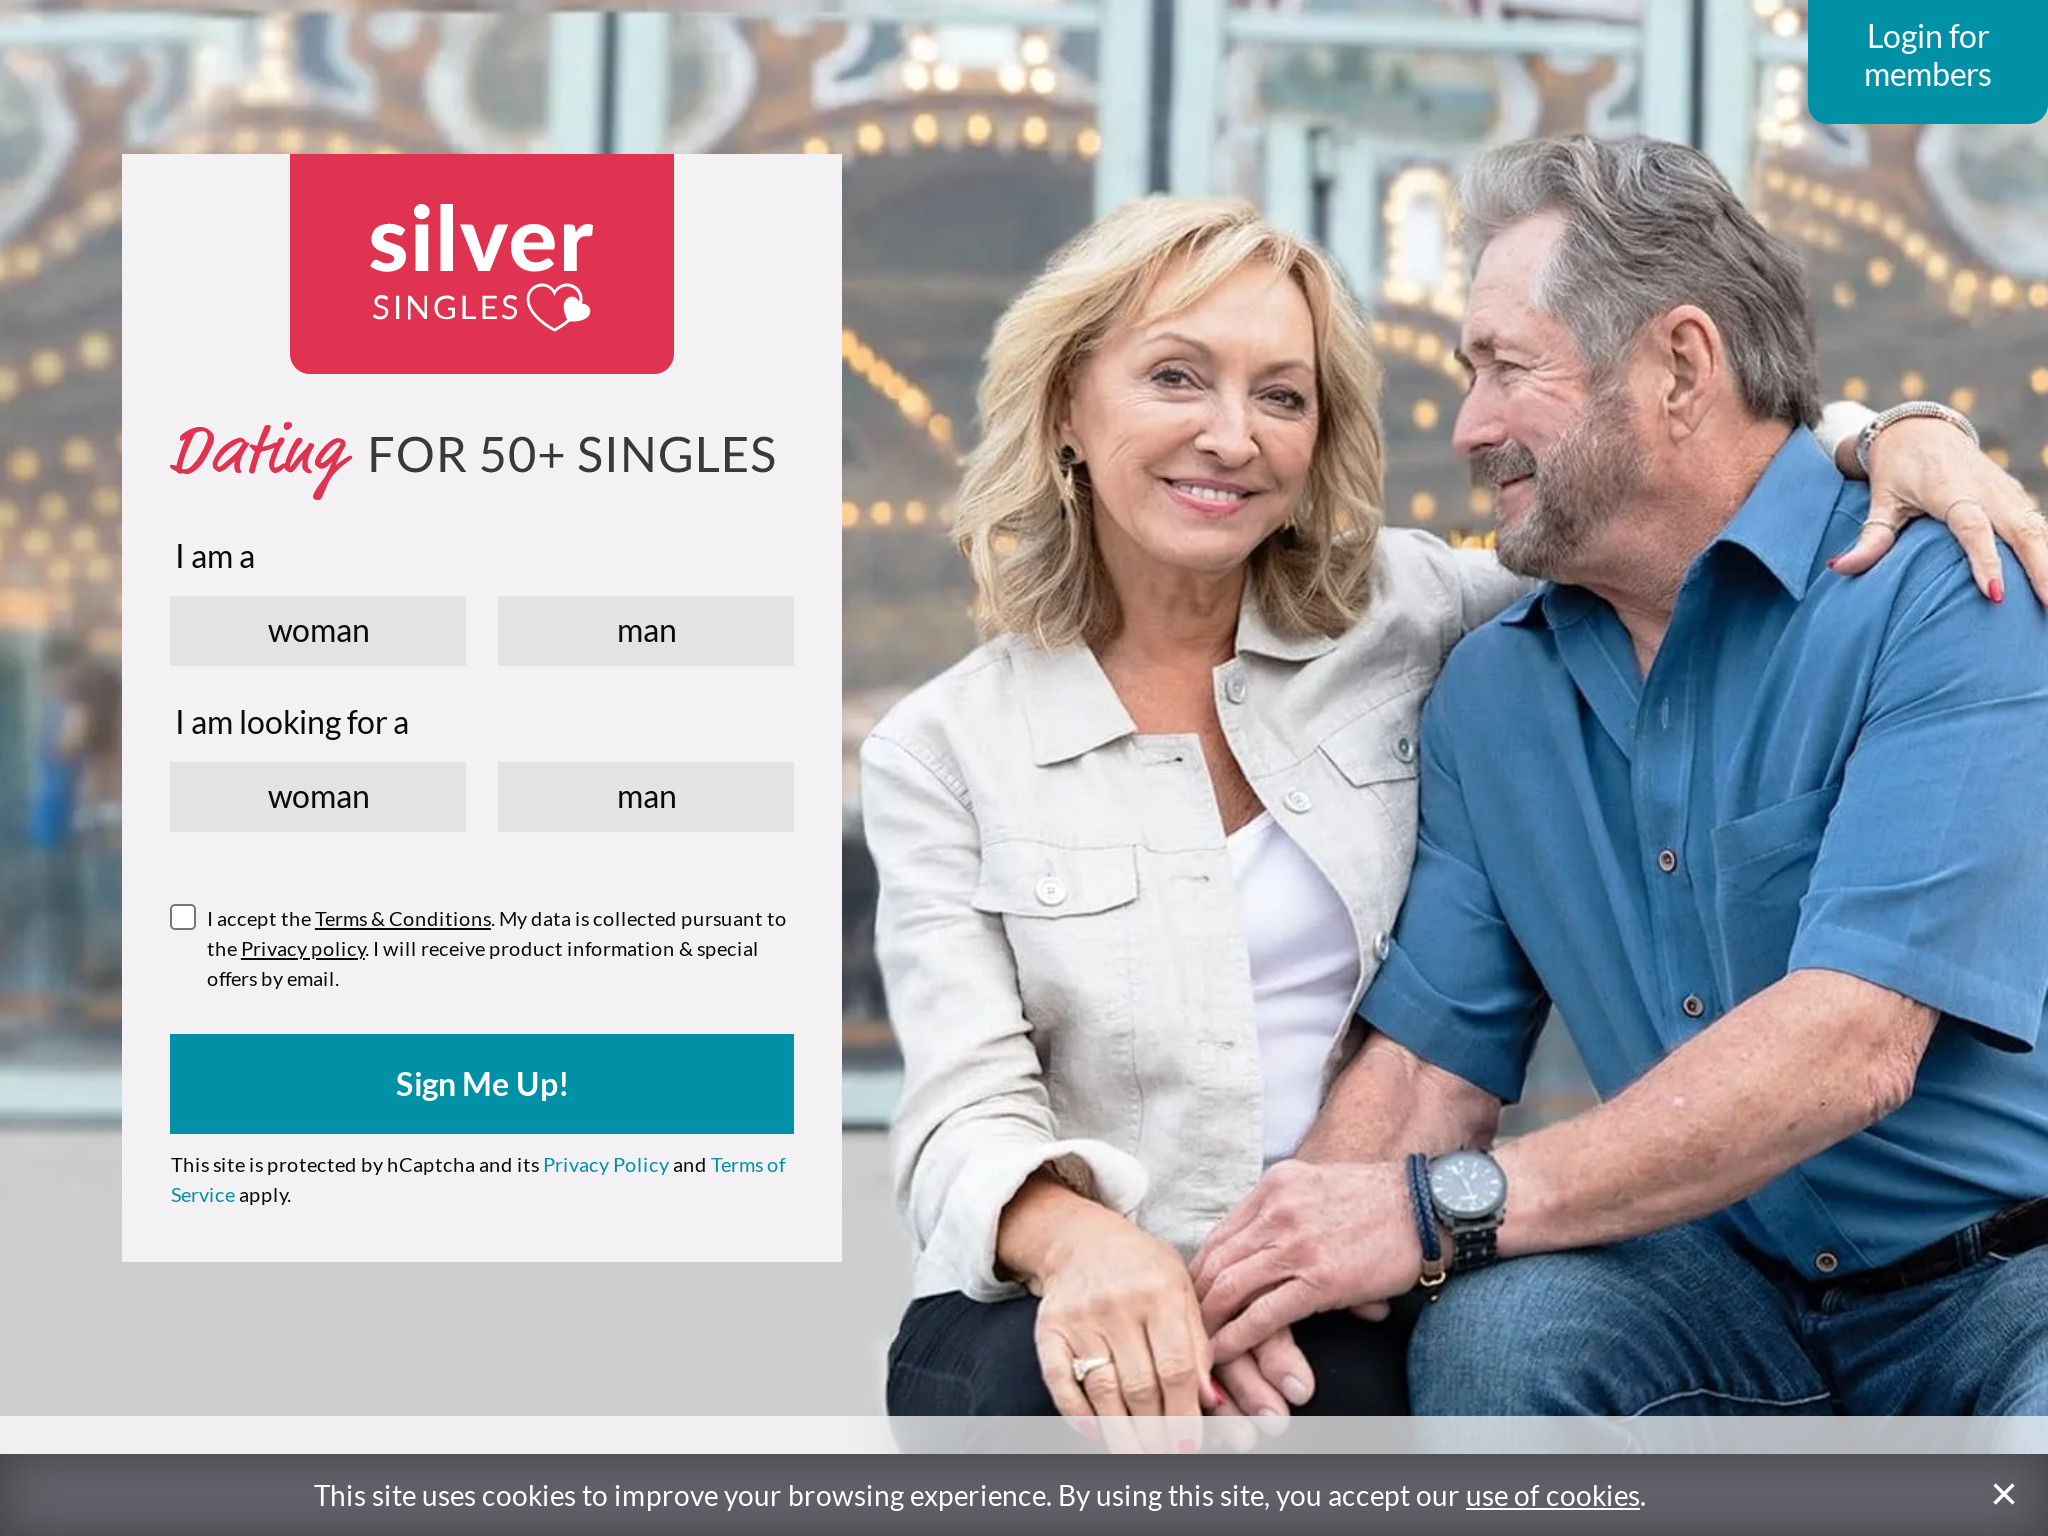 Ready to Mingle? Read This 2023 SilverSingles Review!